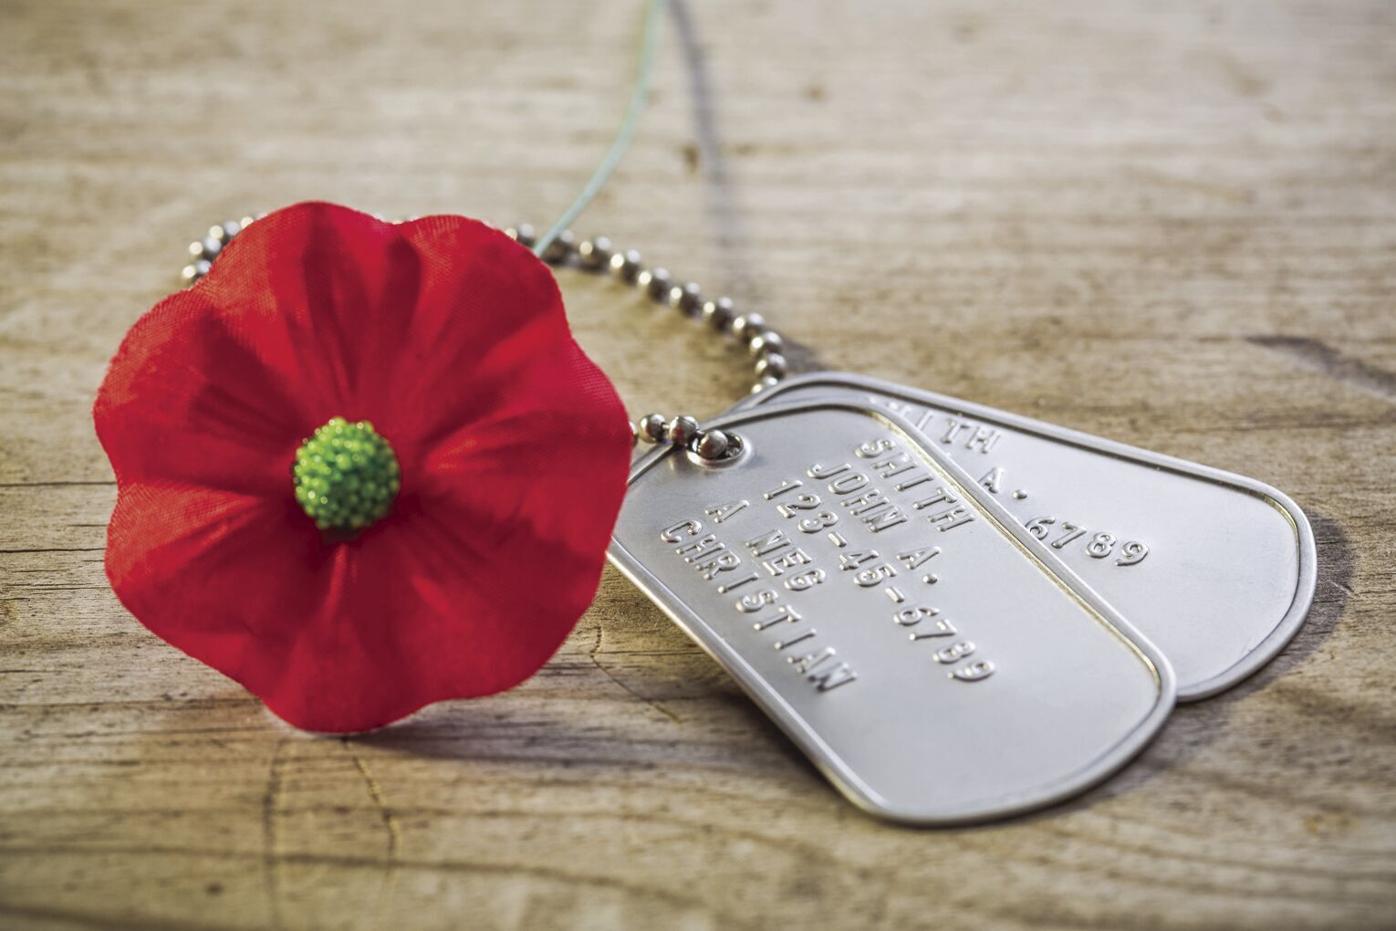 The Poppy Flower And It's Significance To Memorial Day - Avas Flowers